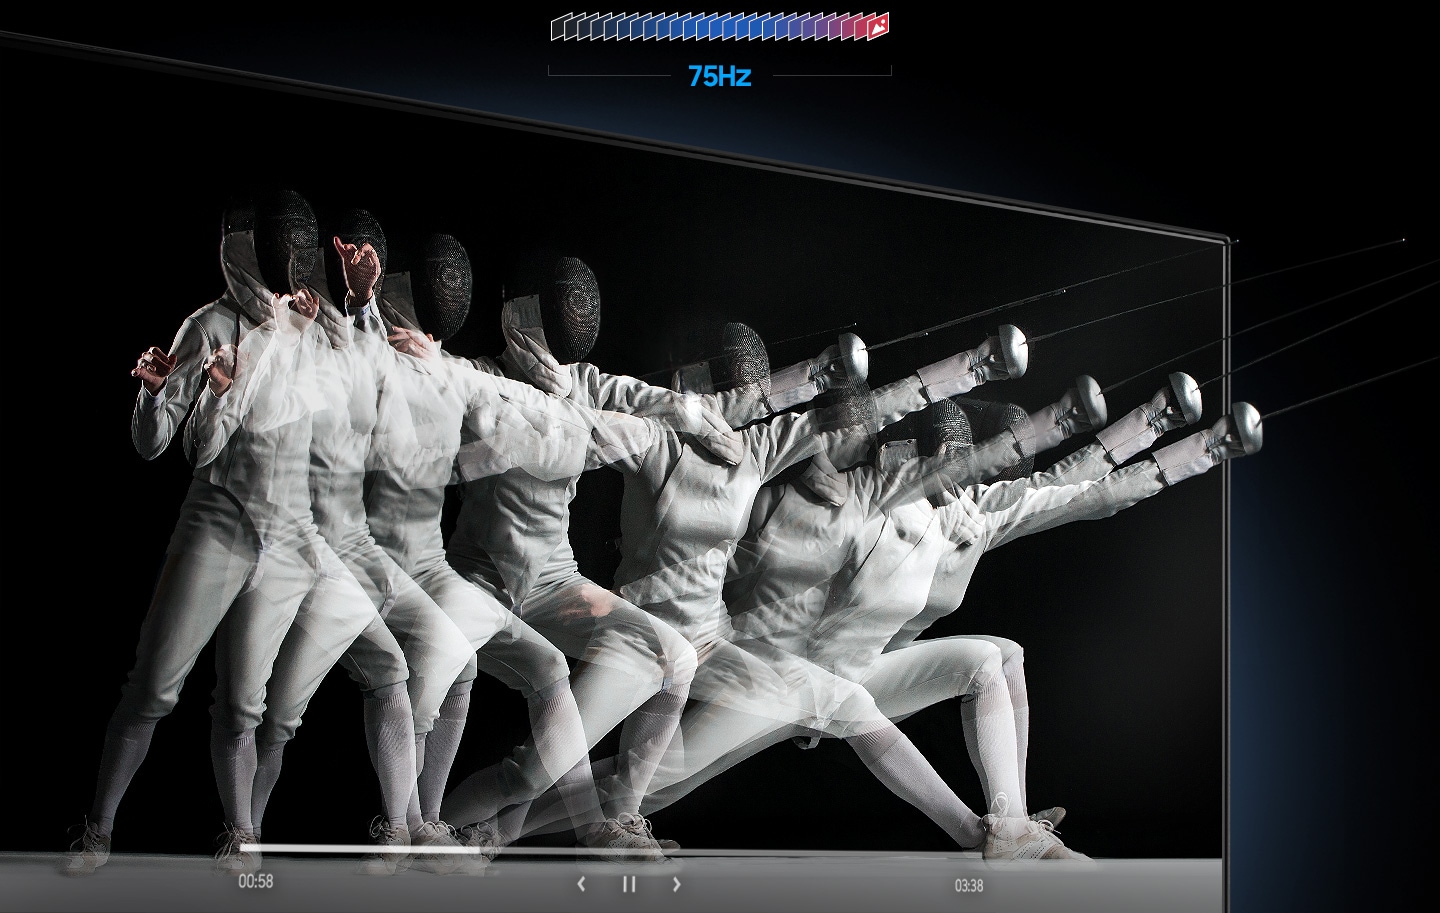 The screen refresh rate of 75Hz is displayed as a stop-motion image of the fencer's stab.